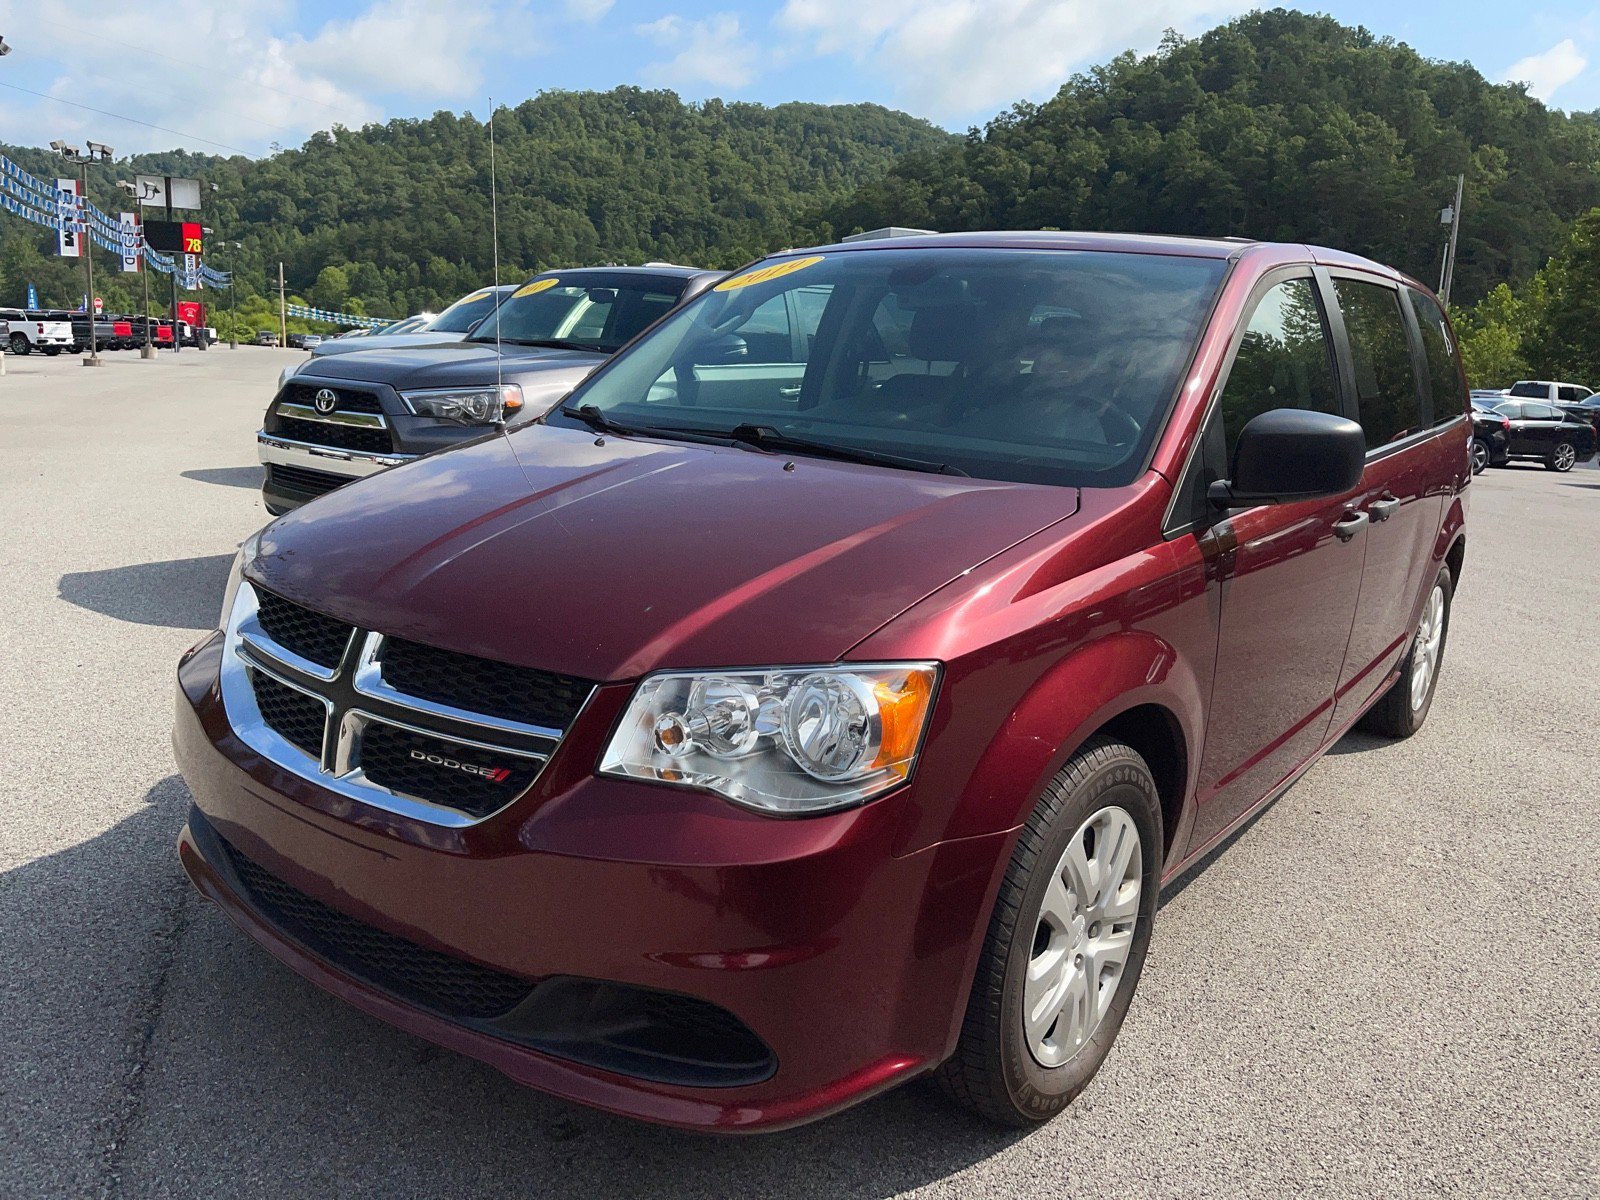 Used Dodge Grand Caravan for Sale Right Now - Autotrader